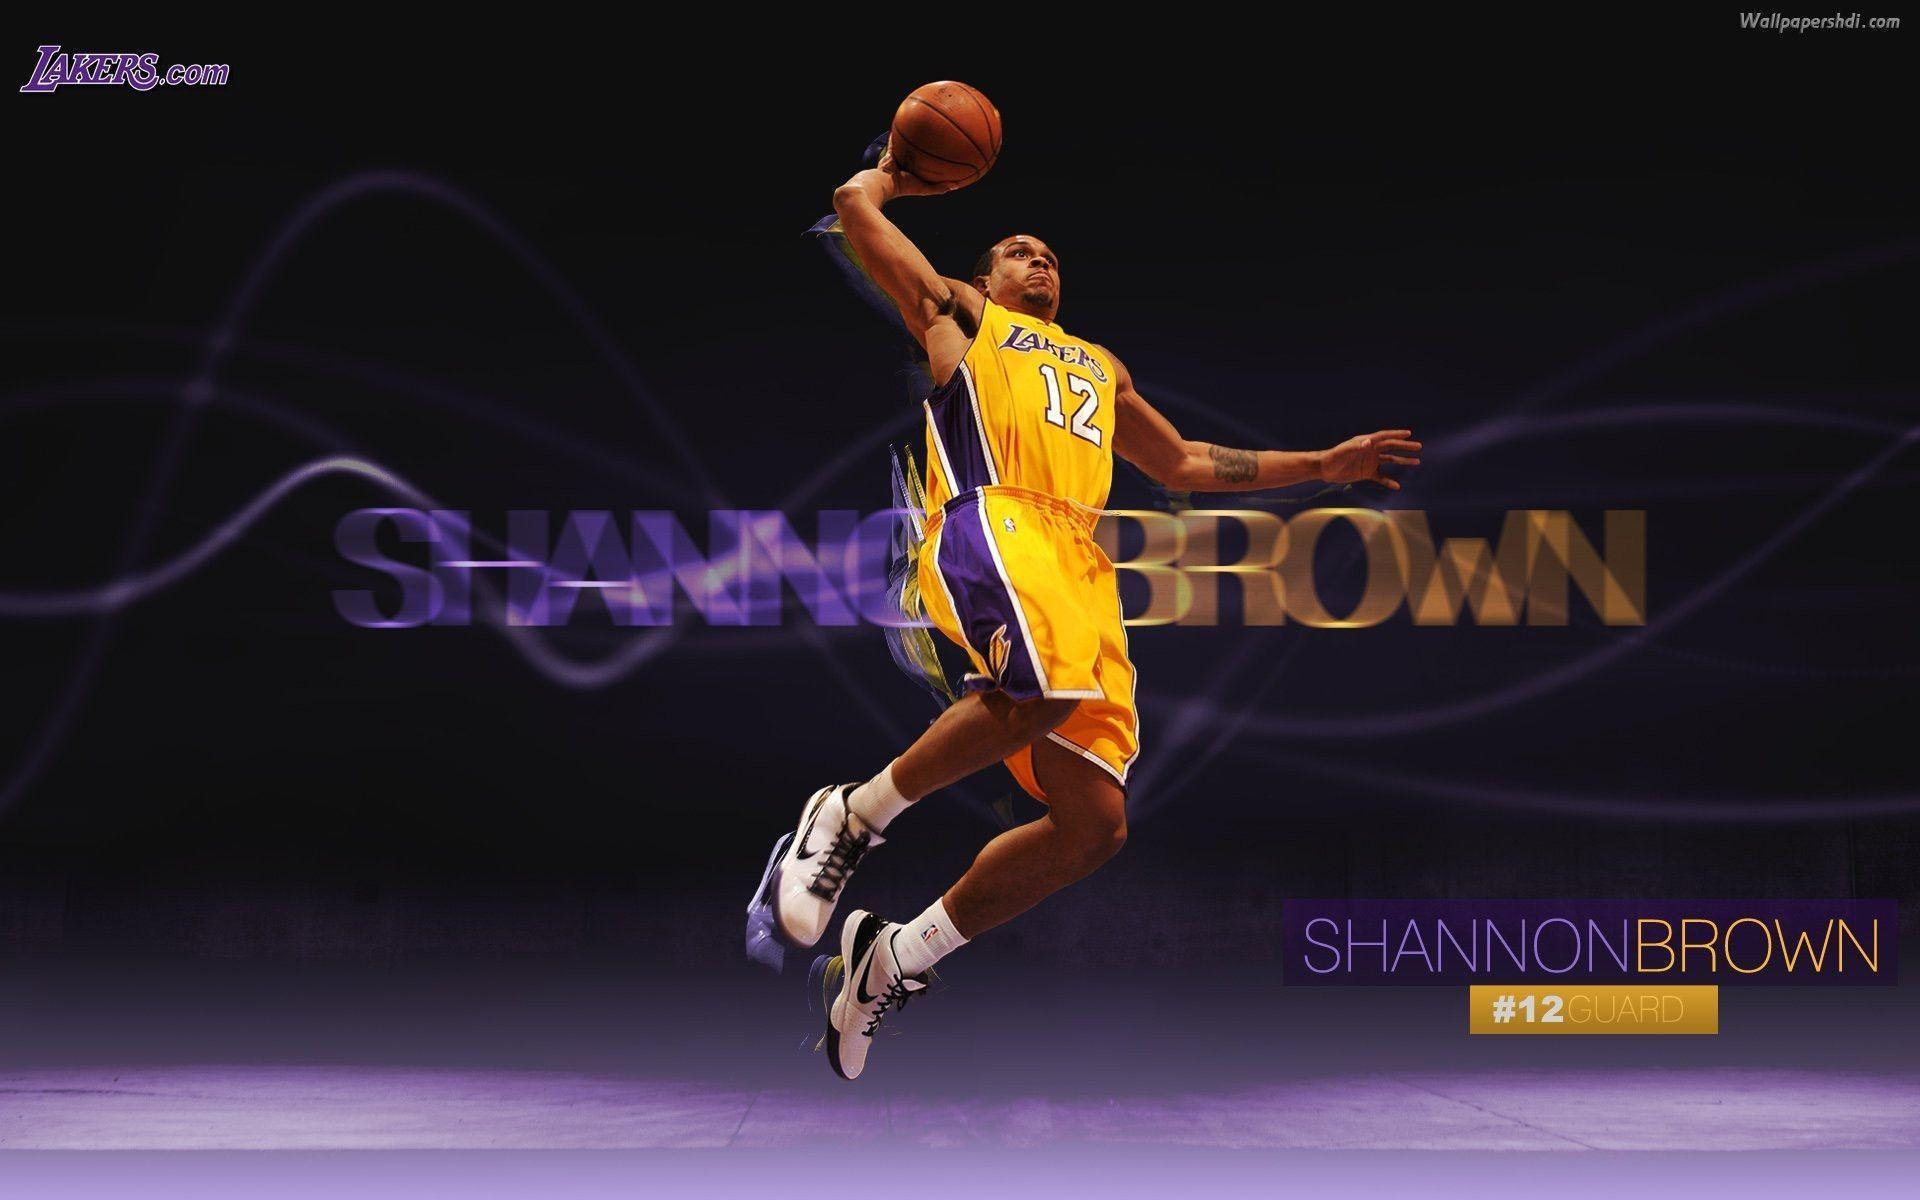 2013 Los Angeles Lakers Wallpapers 36 25097 Image HD Wallpapers